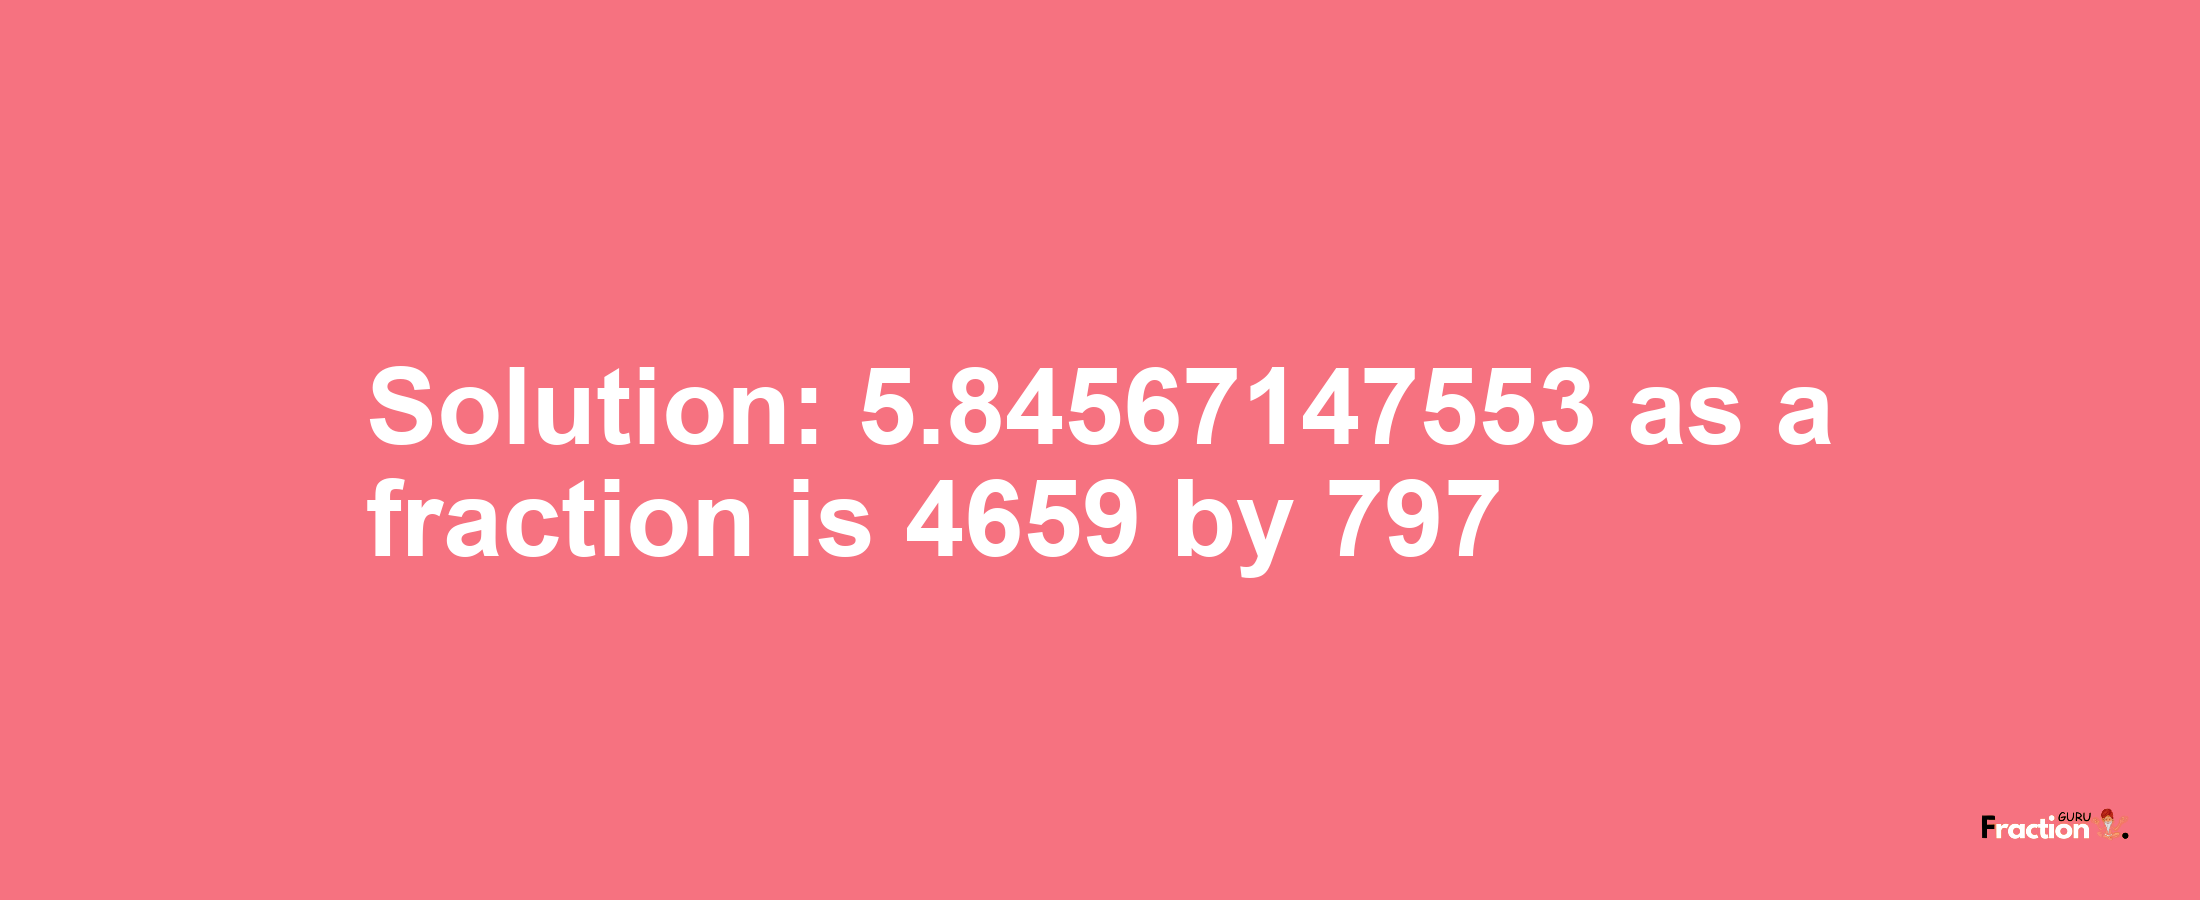 Solution:5.84567147553 as a fraction is 4659/797